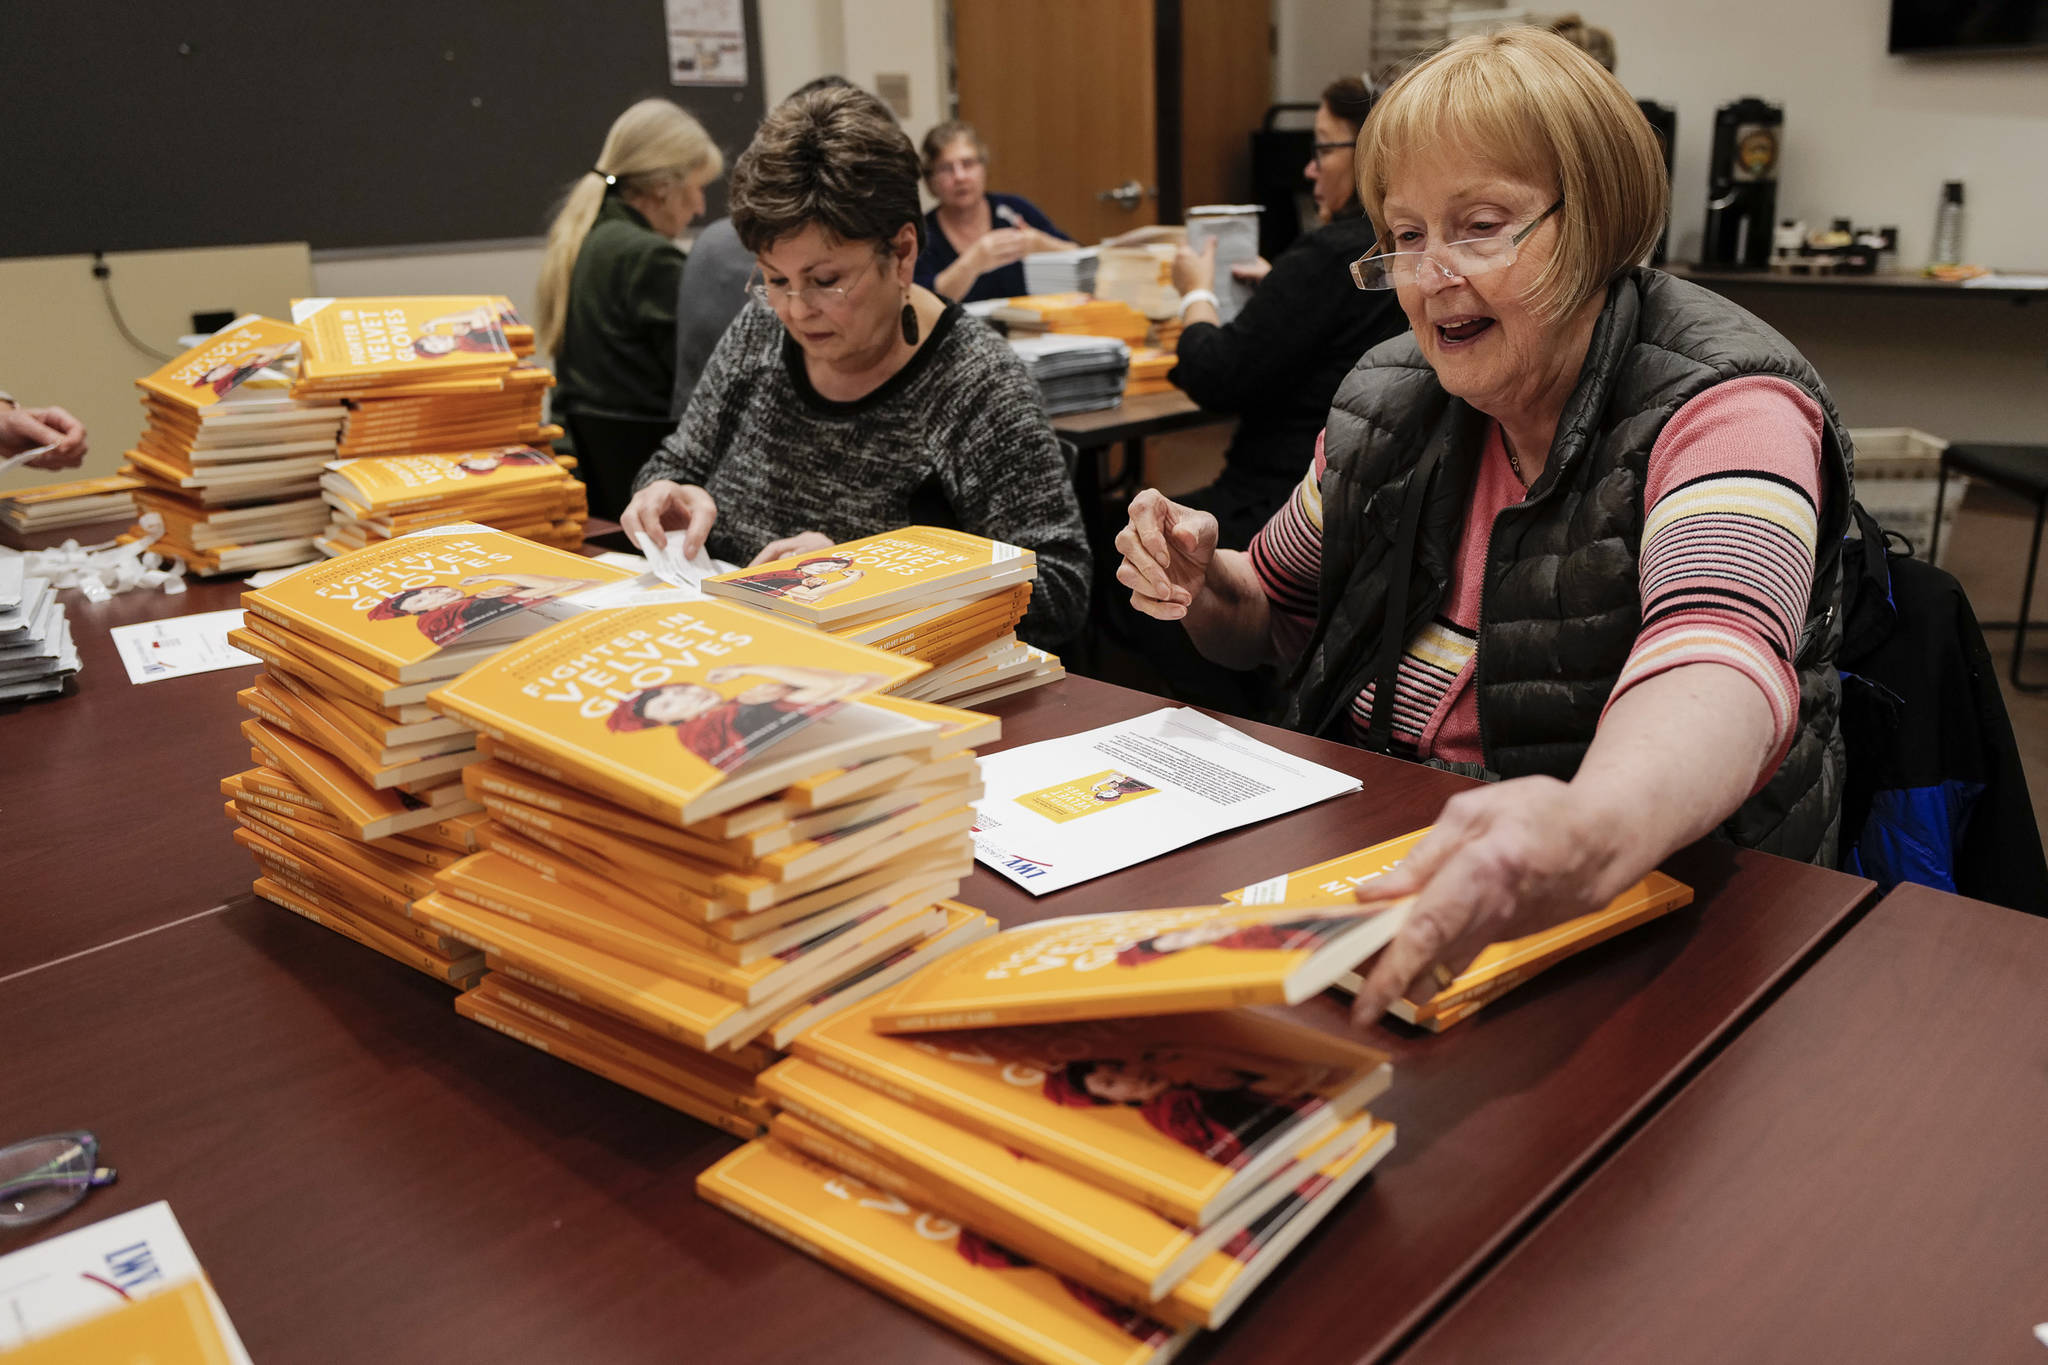 League of Women Voters of Juneau volunteers Karen Crane, left, Cheryl Jebe and others prepare Annie Boochever's book about civil rights leader Elizabeth Peratrovich, "Fighter in Velvet Gloves," for mailing at the Andrew P. Kashevaroff Building on Monday, Dec. 2, 2019. Over 450 copies of the book were packaged to be shipped to libraries and school across Alaska. (Michael Penn | Juneau Empire)